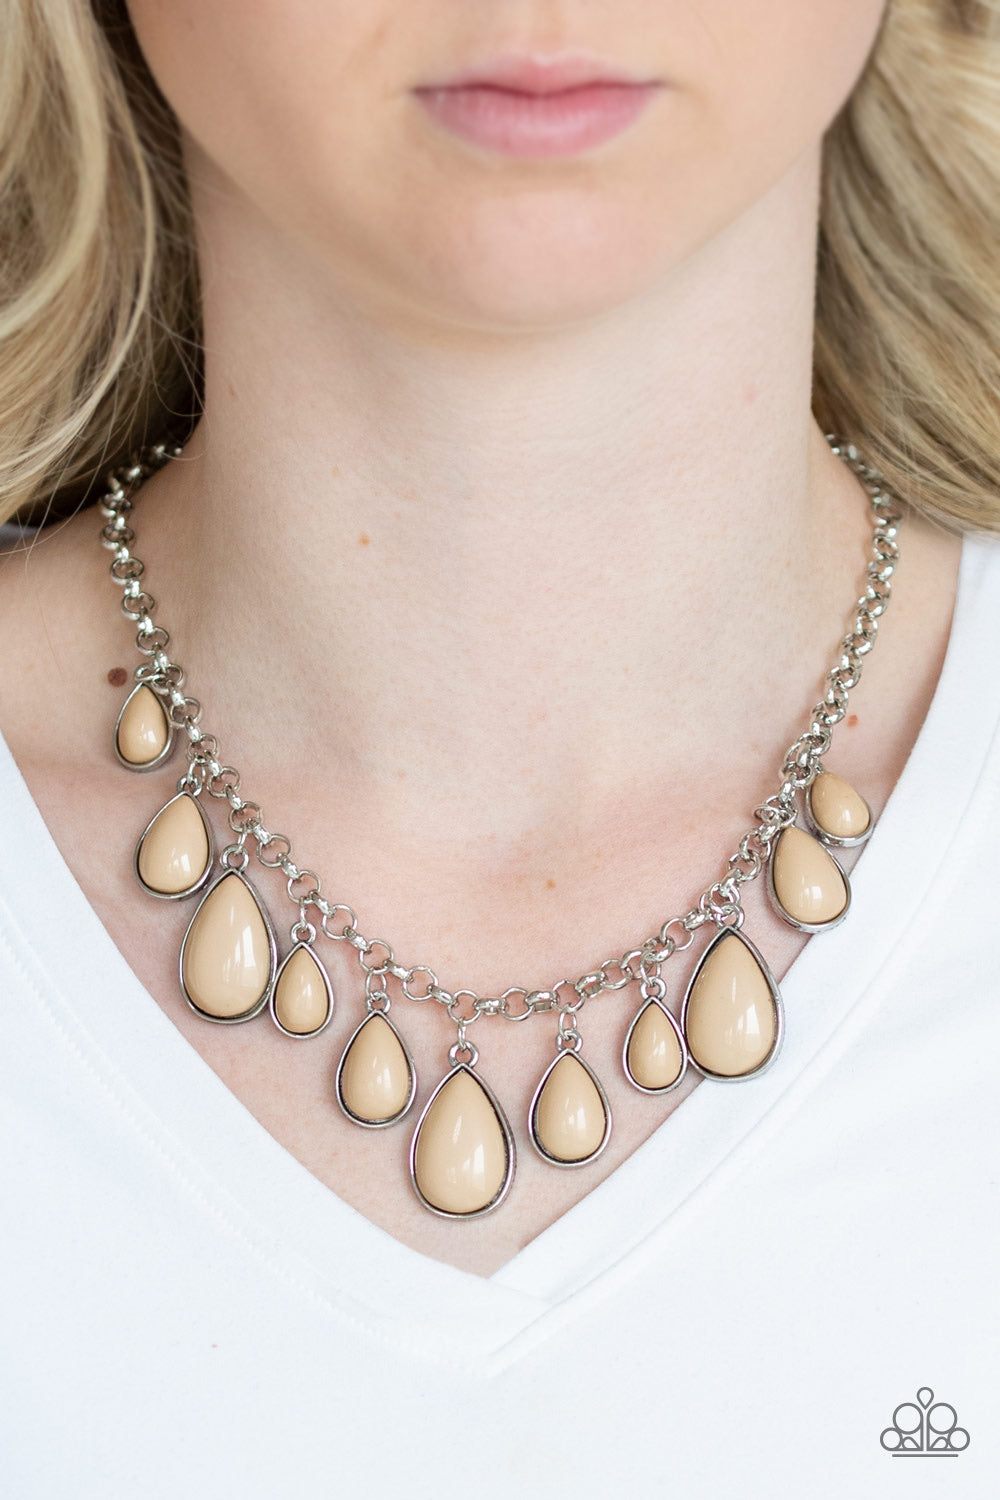 Paparazzi Jewelry Necklace Jaw-Dropping Diva